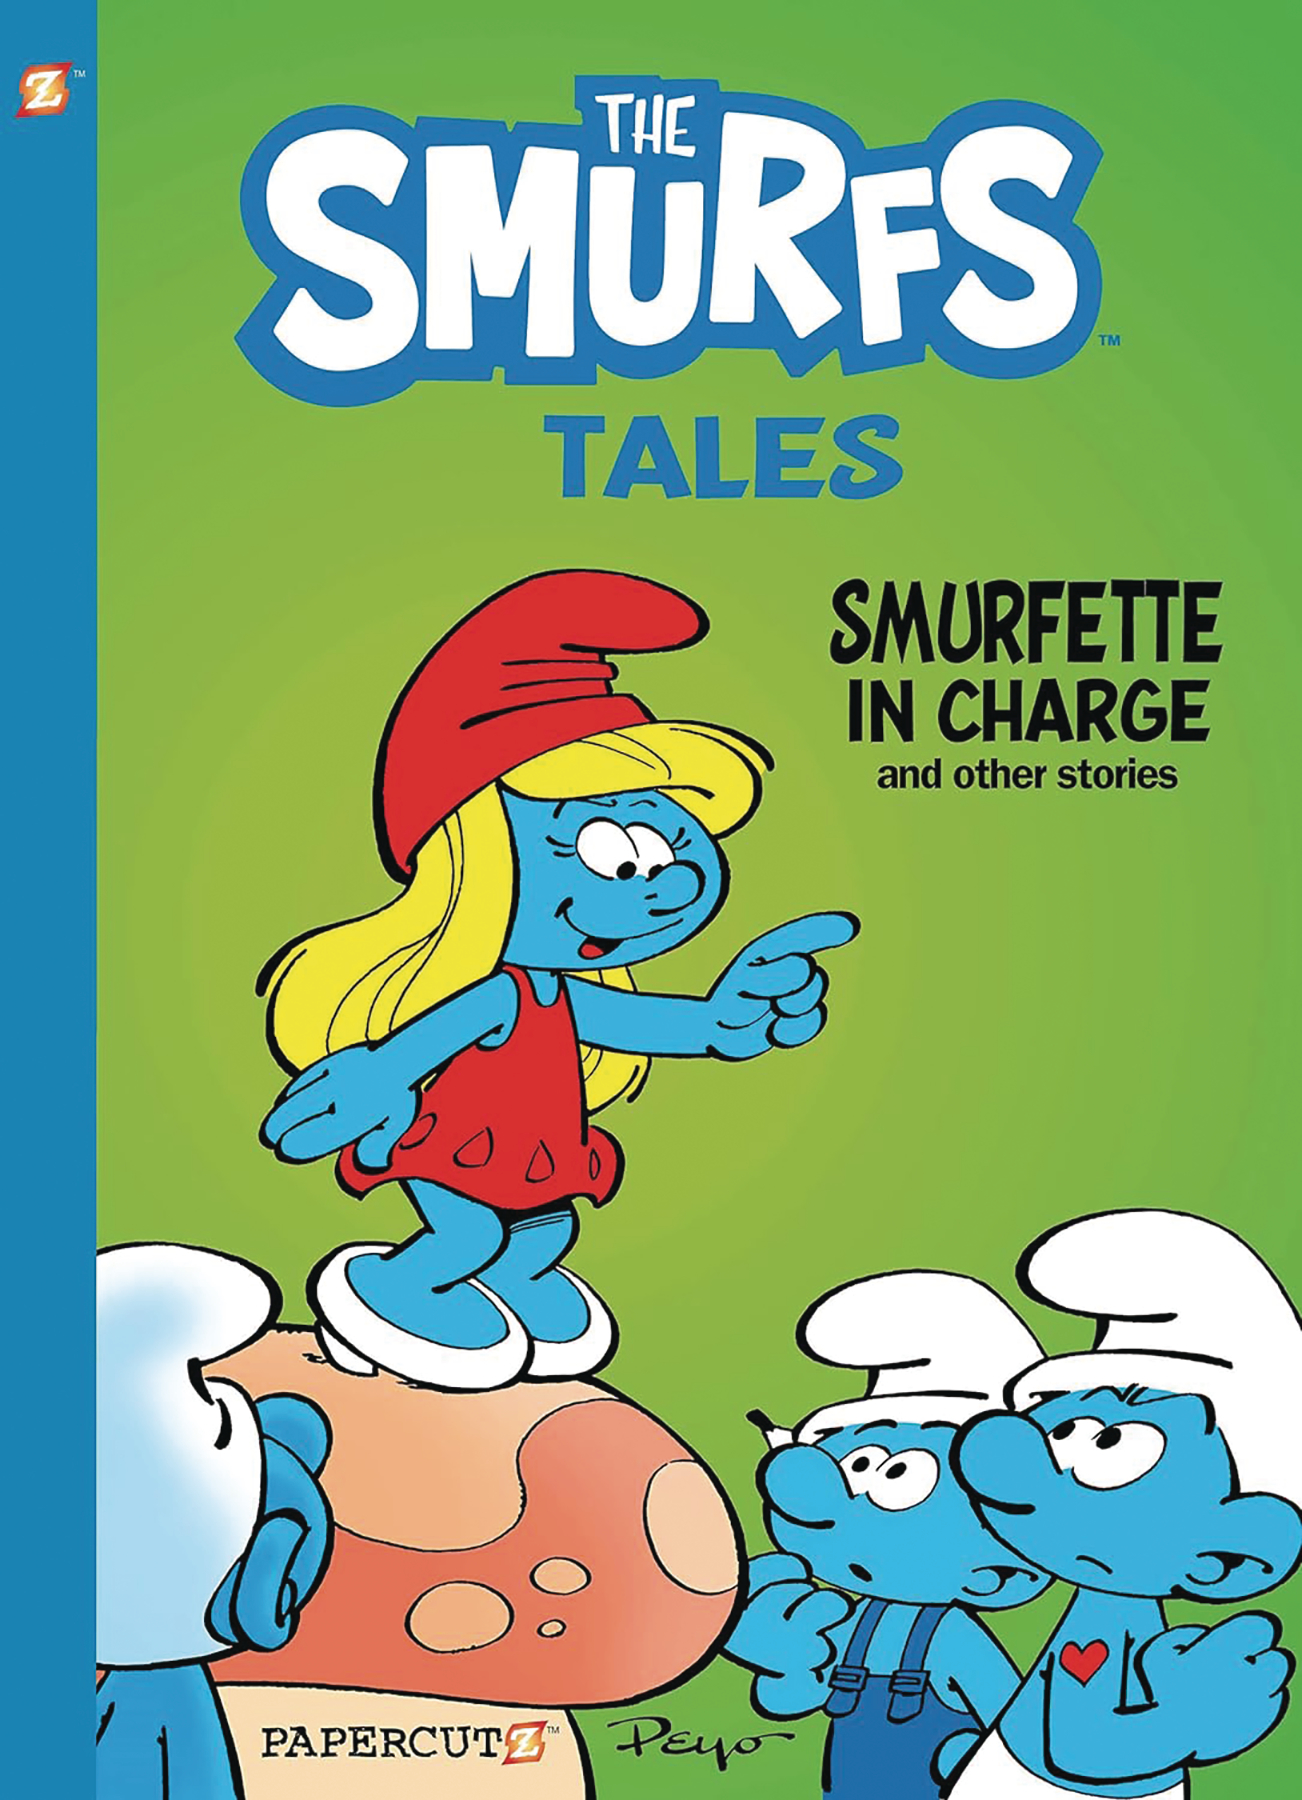 Smurf Tales Hardcover Graphic Novel Volume 2 Smurfette In Charge & Other Stories